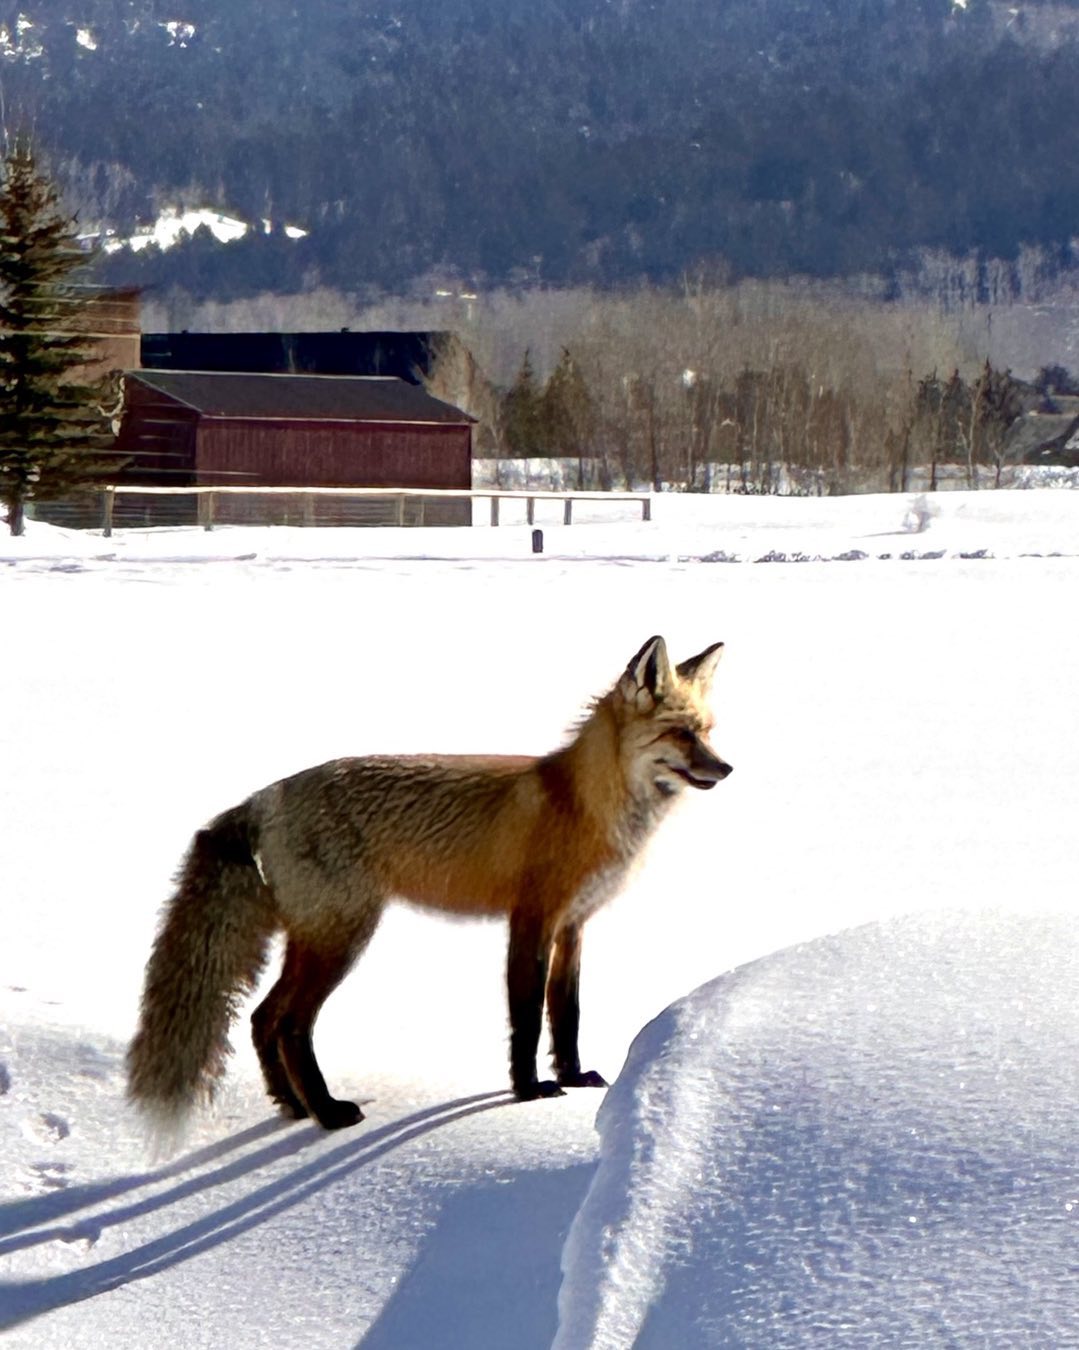 This handsome fox showed up in our backyard this morning, undisturbed by the openness in the light of day. We enjoyed watching its nimbleness as it moved across the snowy field behind our house in Driggs, Idaho #driggsidaho tetonvalleyidaho #bestofthegemstate #foxintheyard #orcuttphotography.com